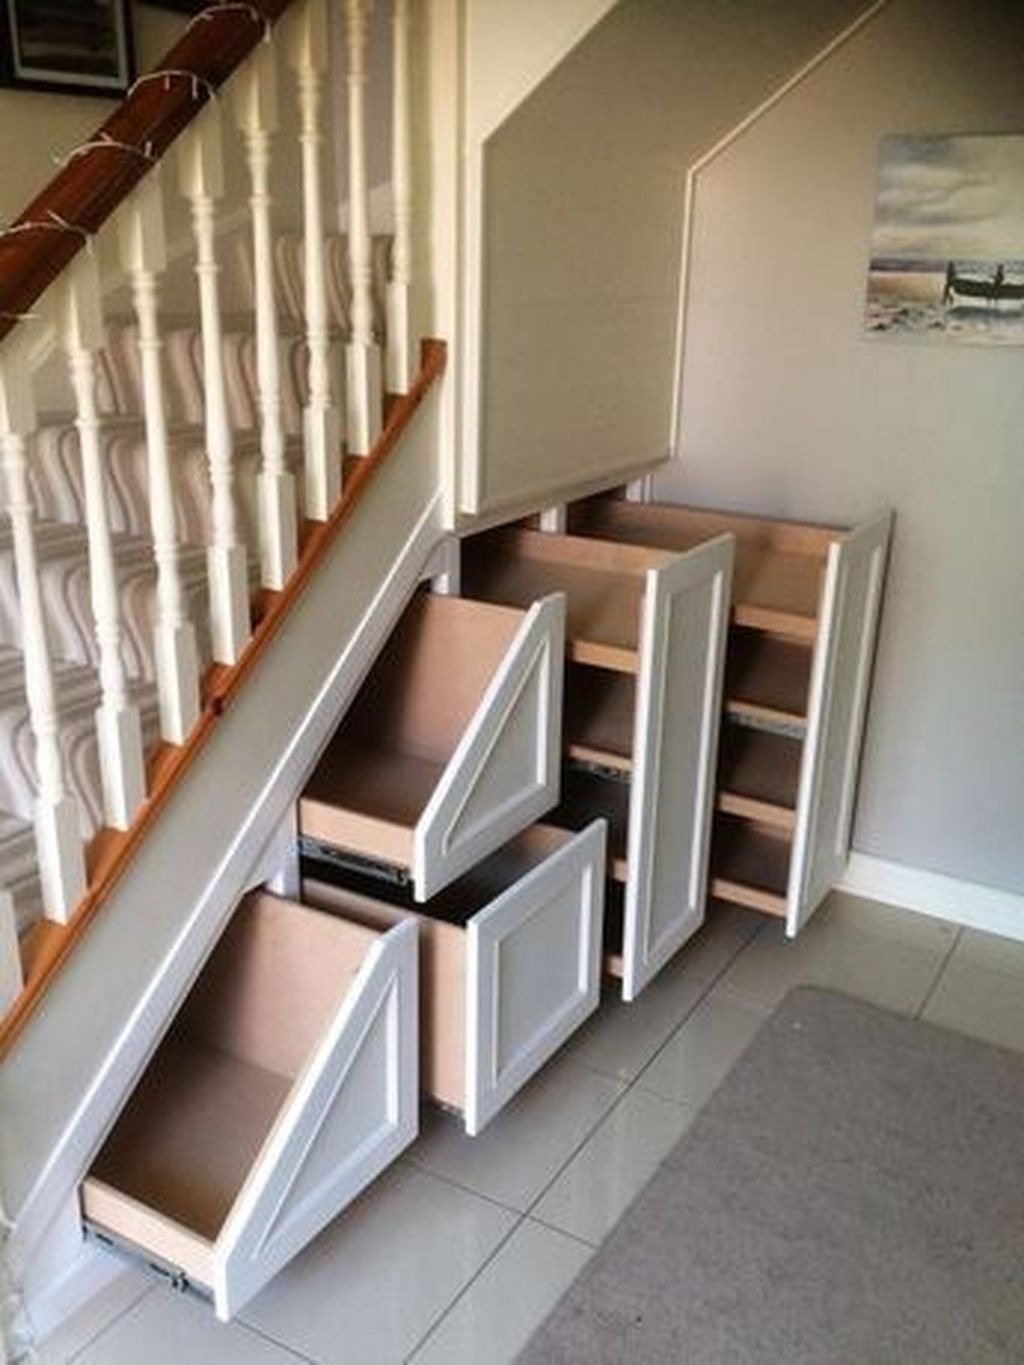 Brilliant Storage Ideas For Under Stairs To Try Asap 37